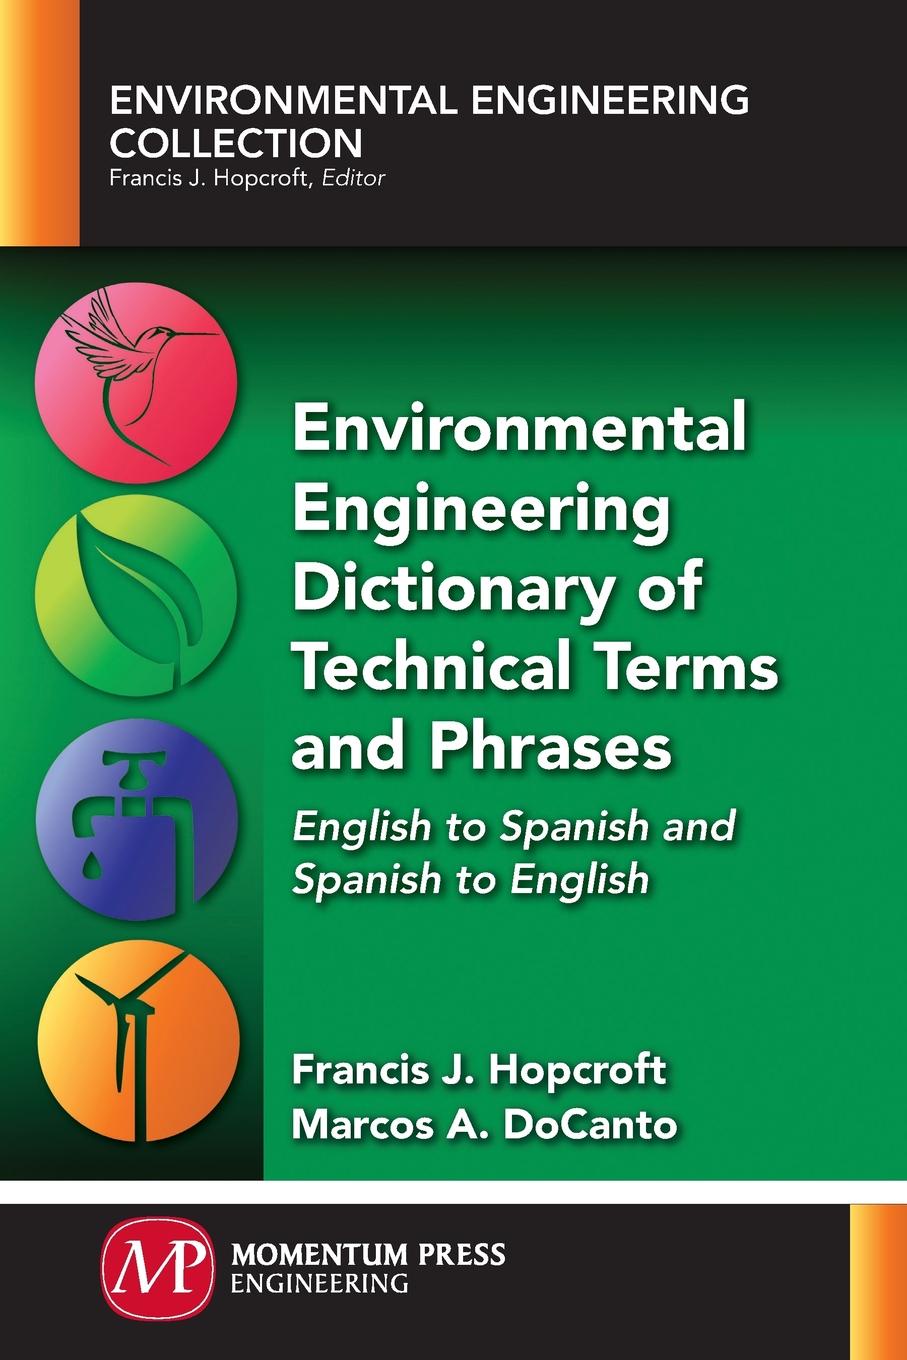 Environmental Engineering Dictionary of Technical Terms and Phrases. English to Spanish and Spanish to English